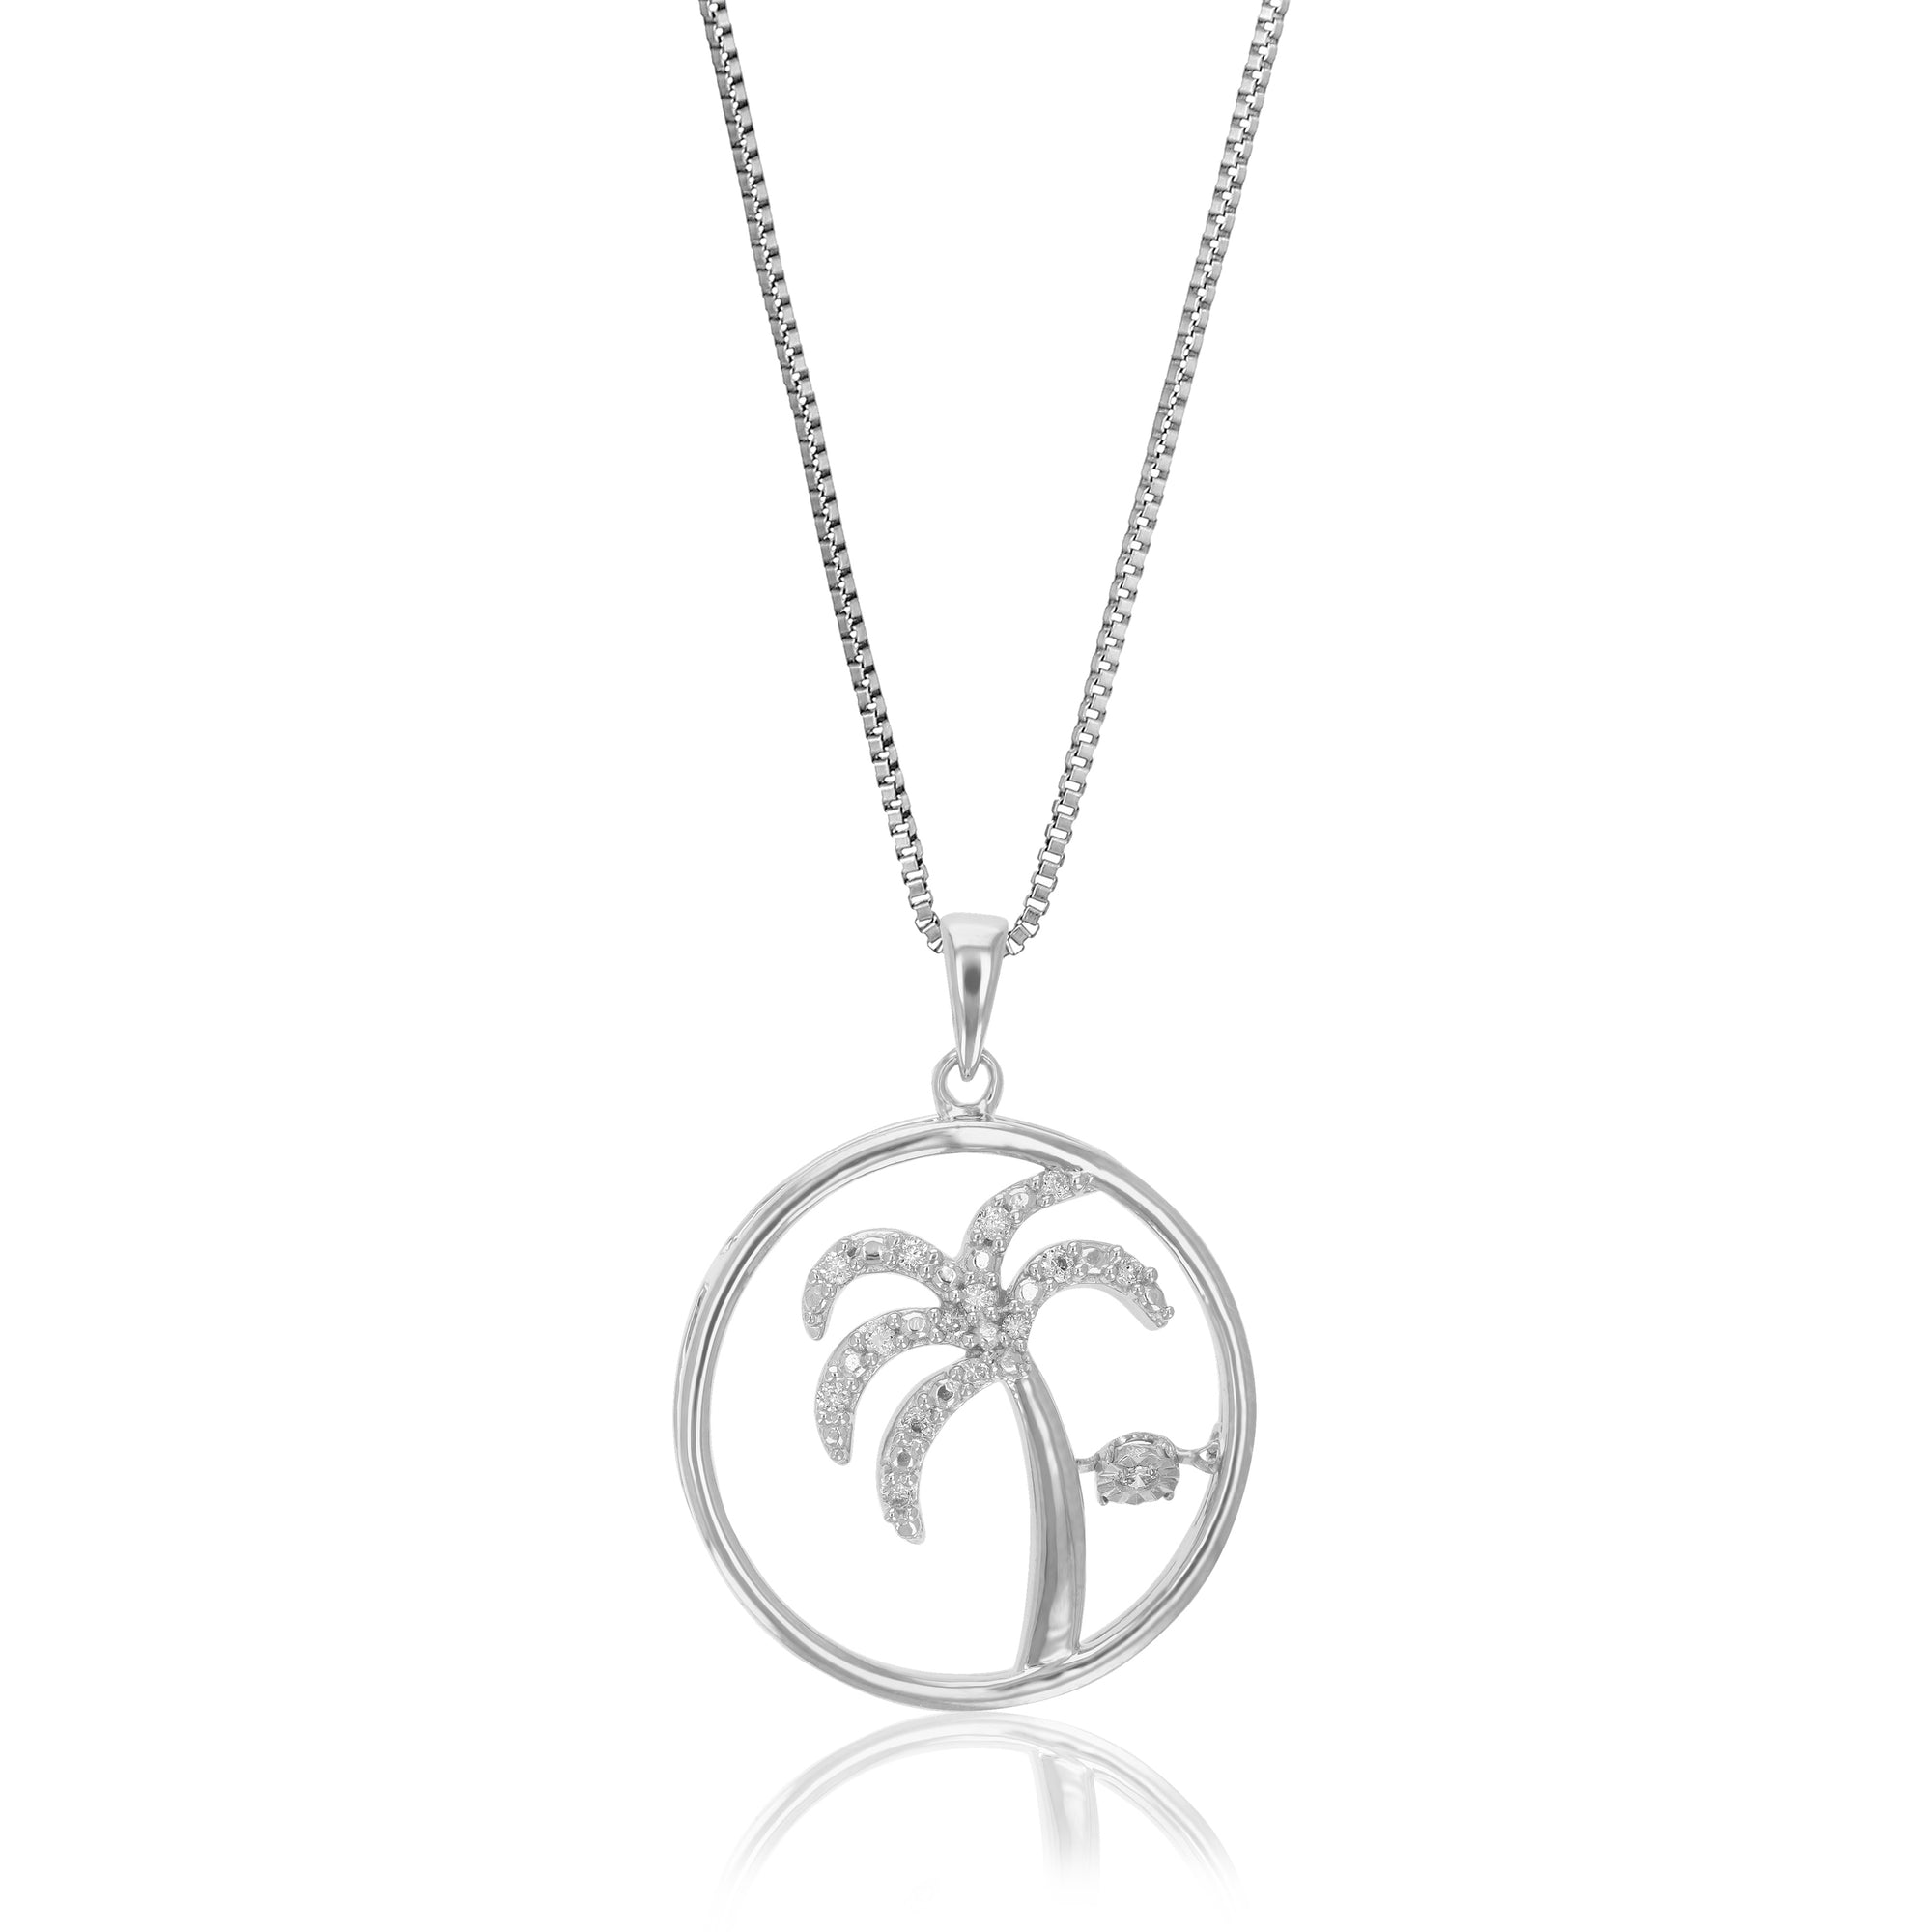 1/12 cttw Diamond Pendant Necklace for Women, Lab Grown Diamond Tree Pendant Necklace in .925 Sterling Silver with Chain, Size 1 Inch